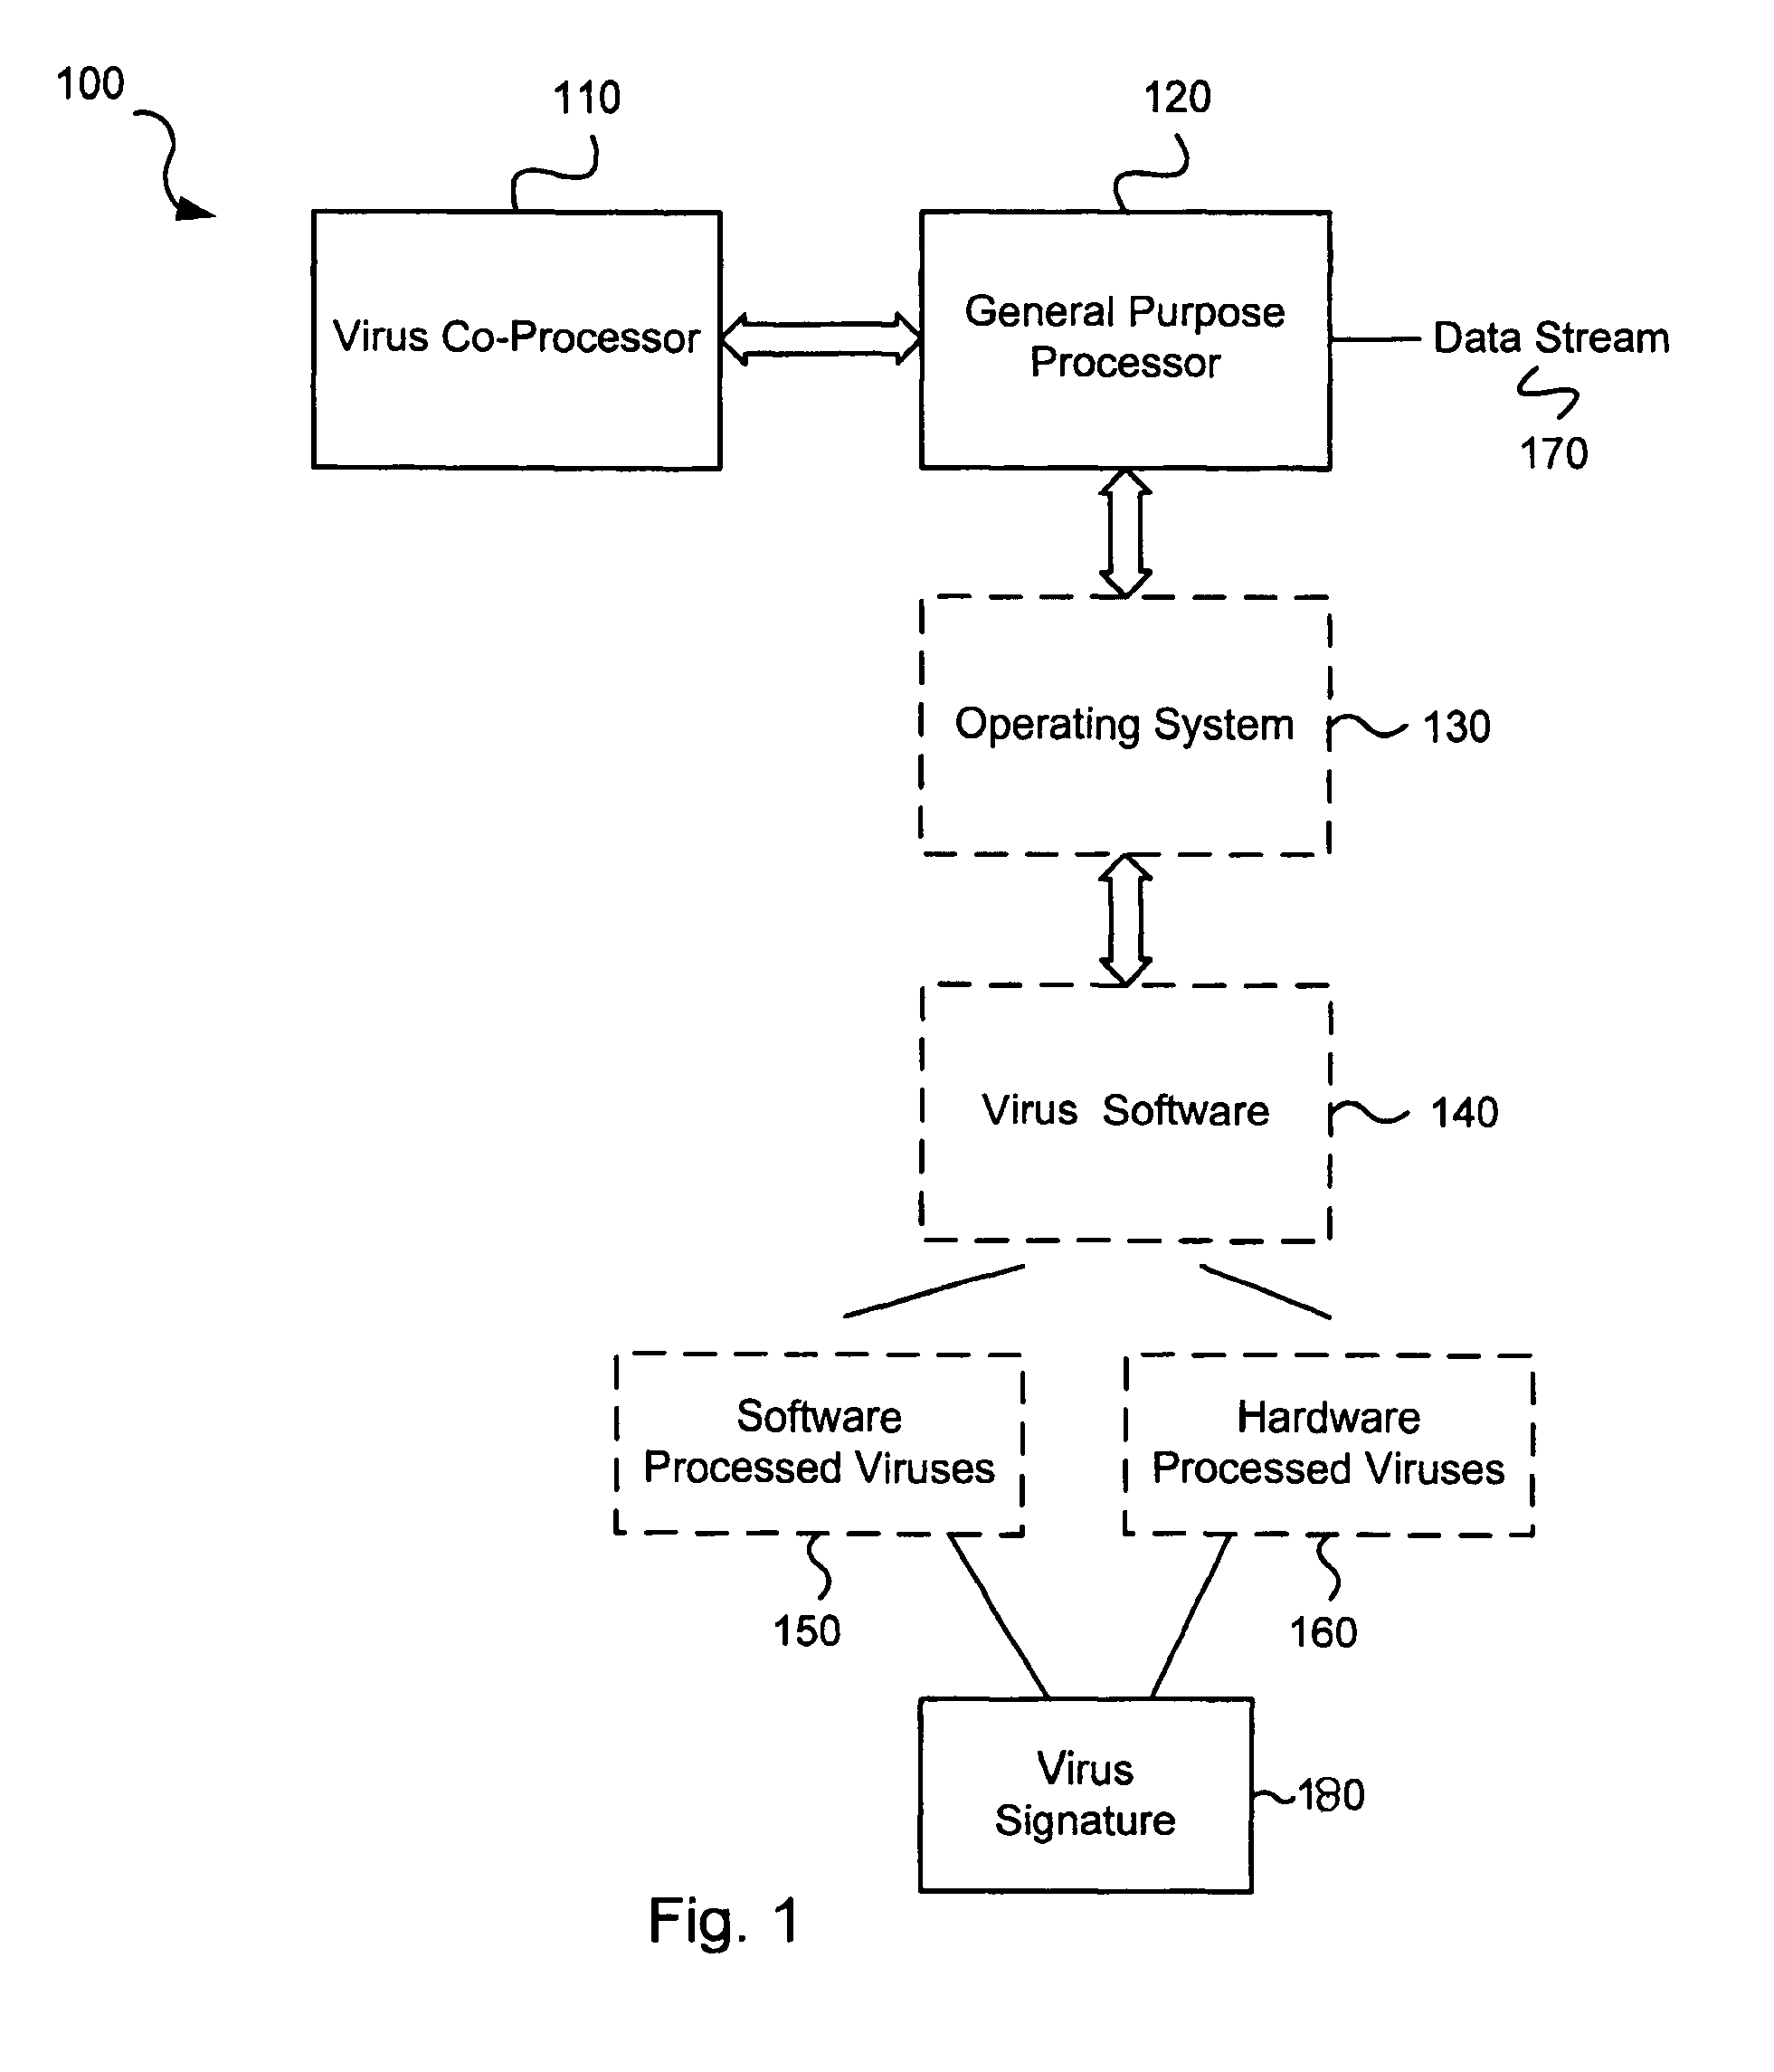 Circuits and methods for operating a virus co-processor